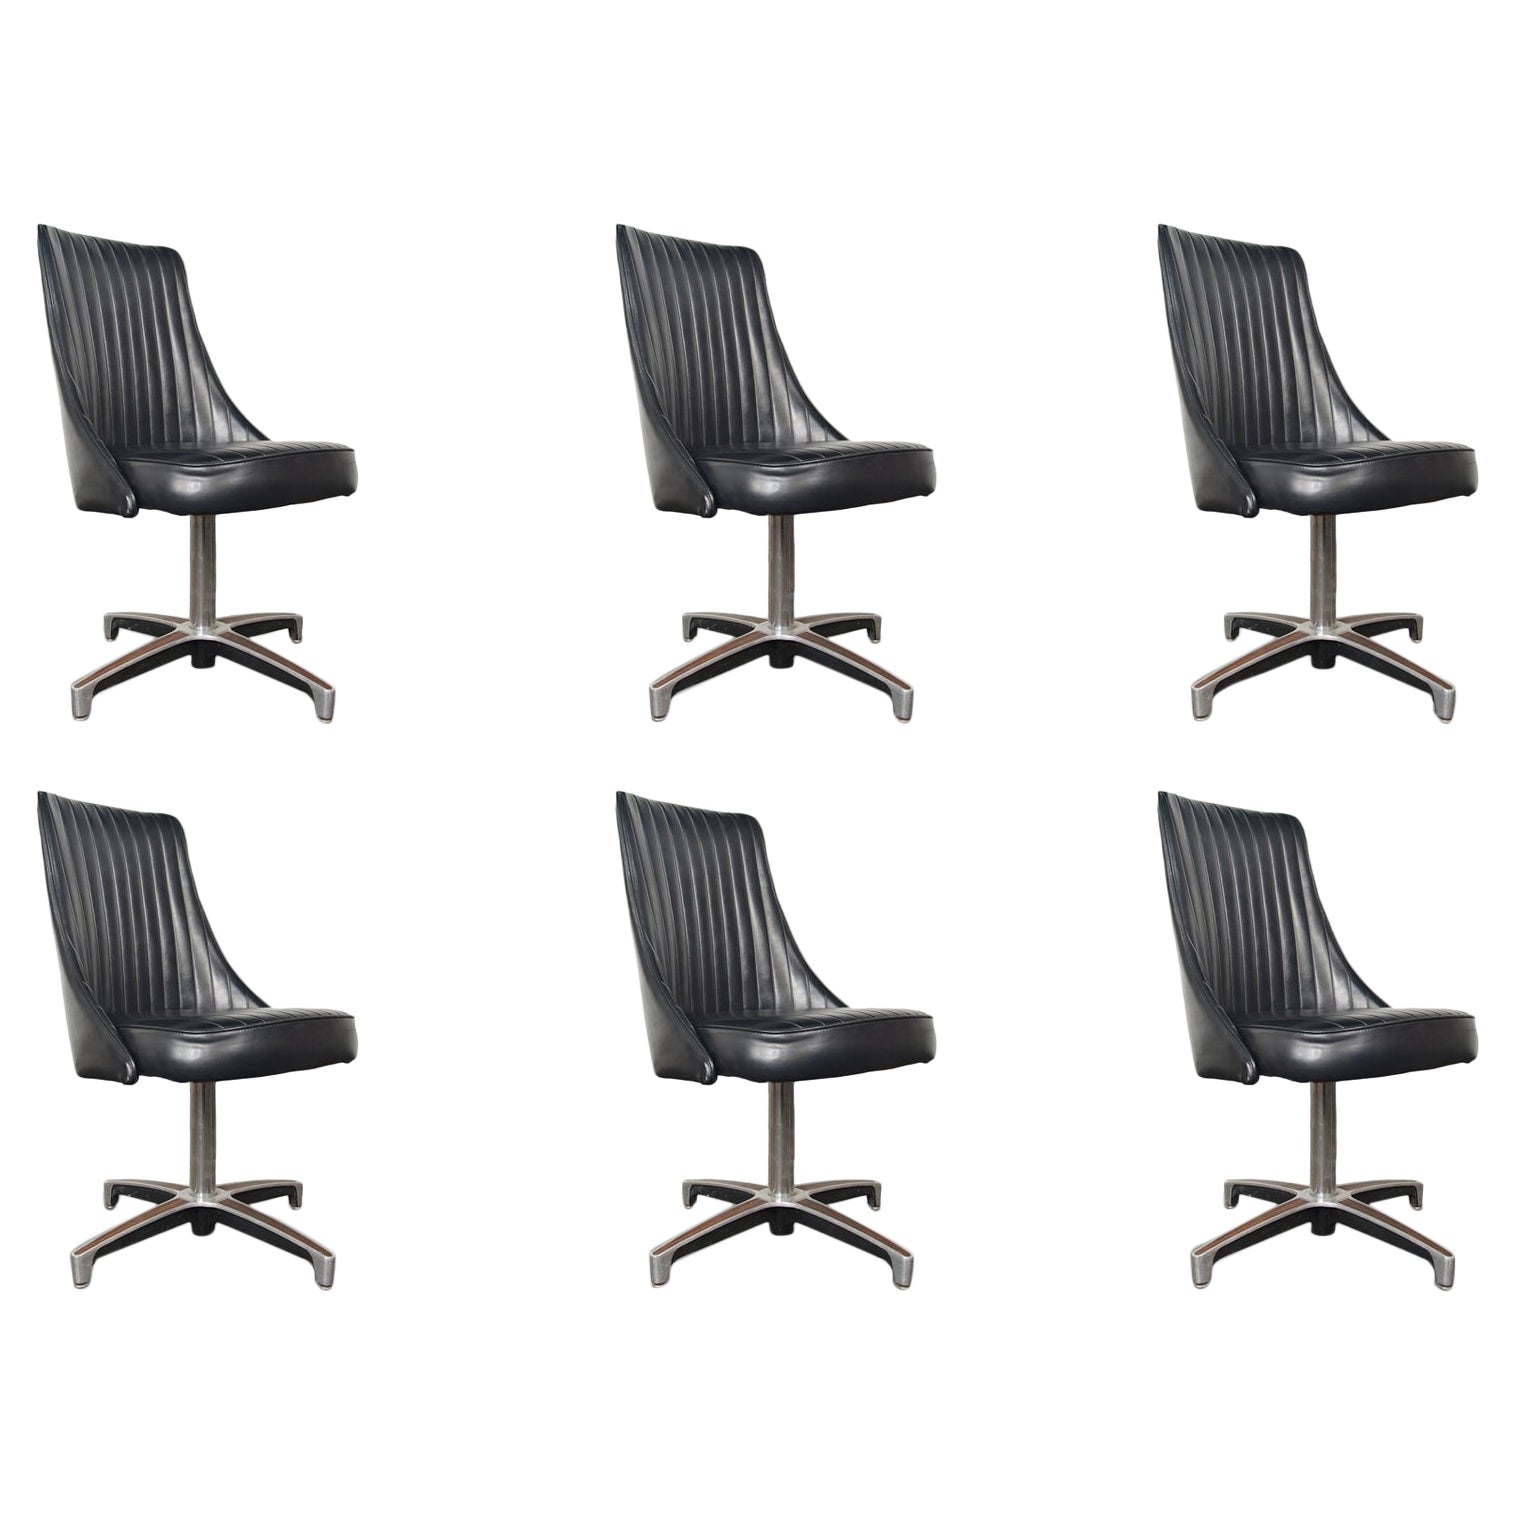 Set of Six Chromcraft Swivel Dining Chairs In Black Vinyl For Sale